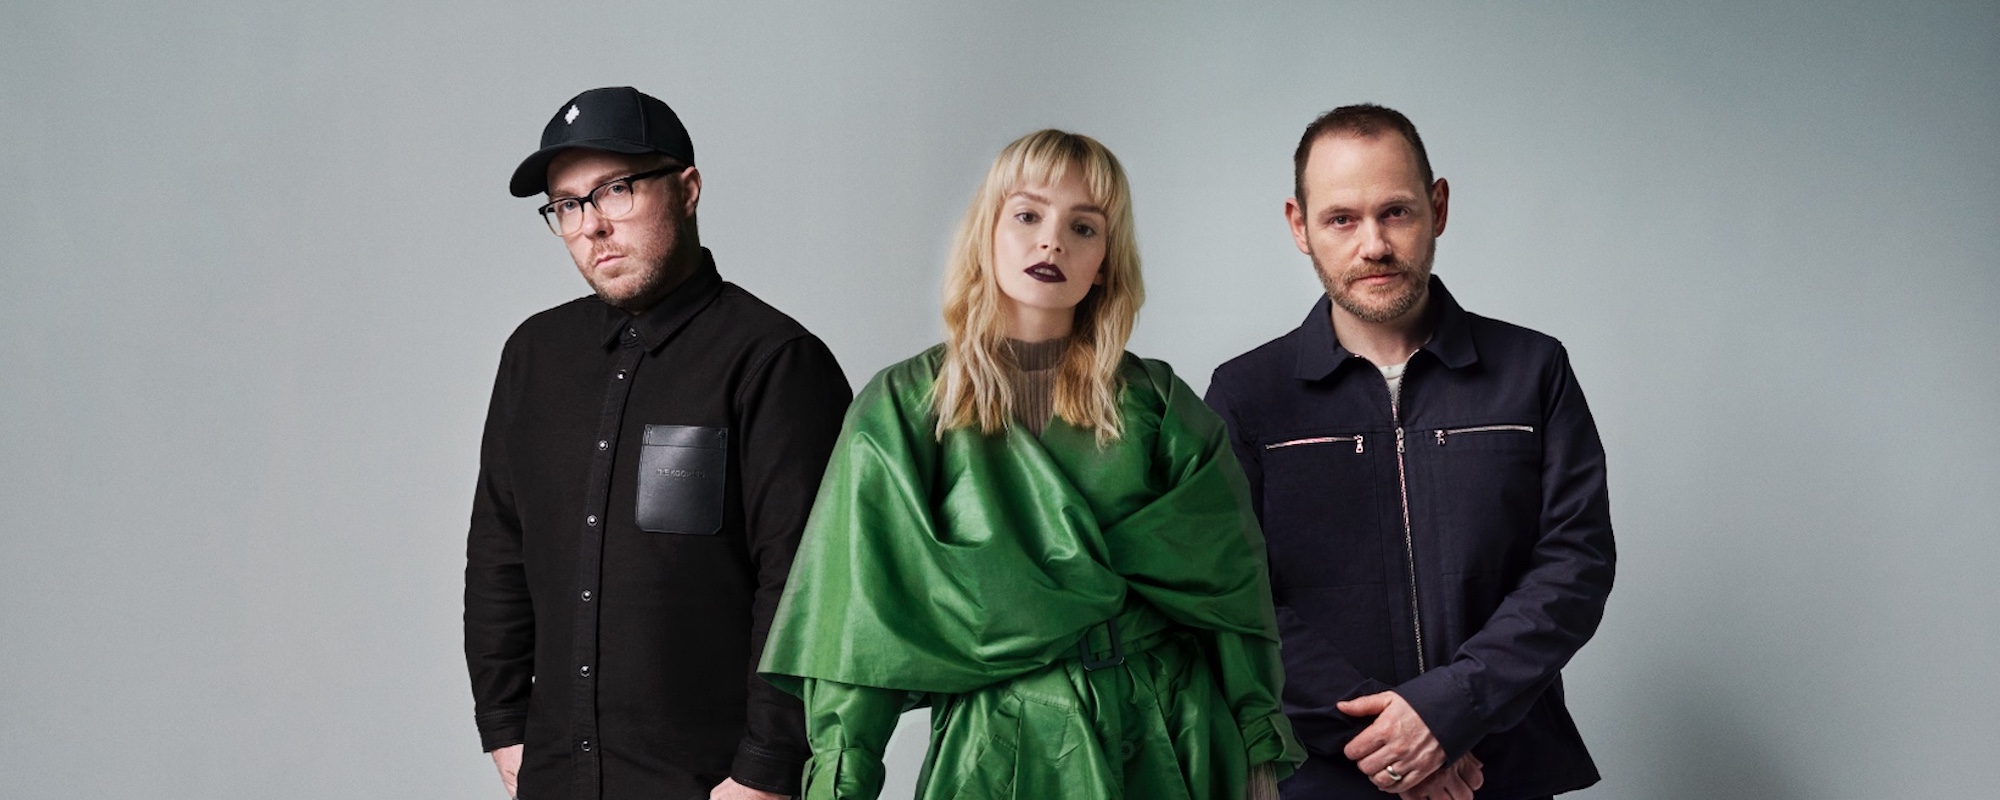 Behind the Band Name: Chvrches